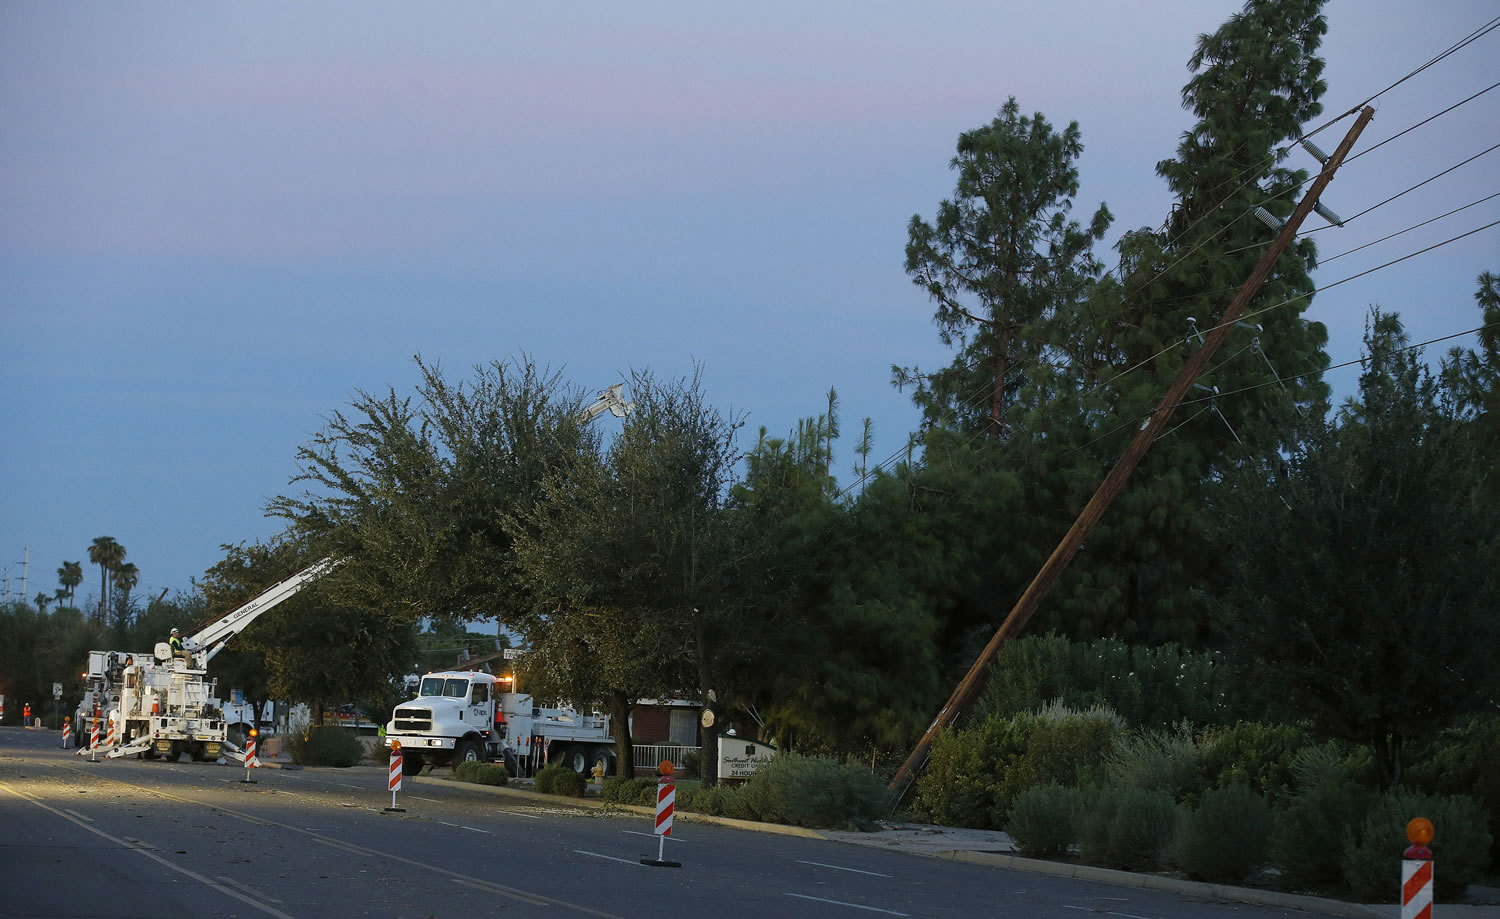 Power crews begin working on downed power lines to restore power to thousands left in the dark early on Tuesday in Phoenix, after monsoon storms hit the Phoenix area Monday night knocking out power to thousands, delaying air travel, and stranding motorists in flash floods.